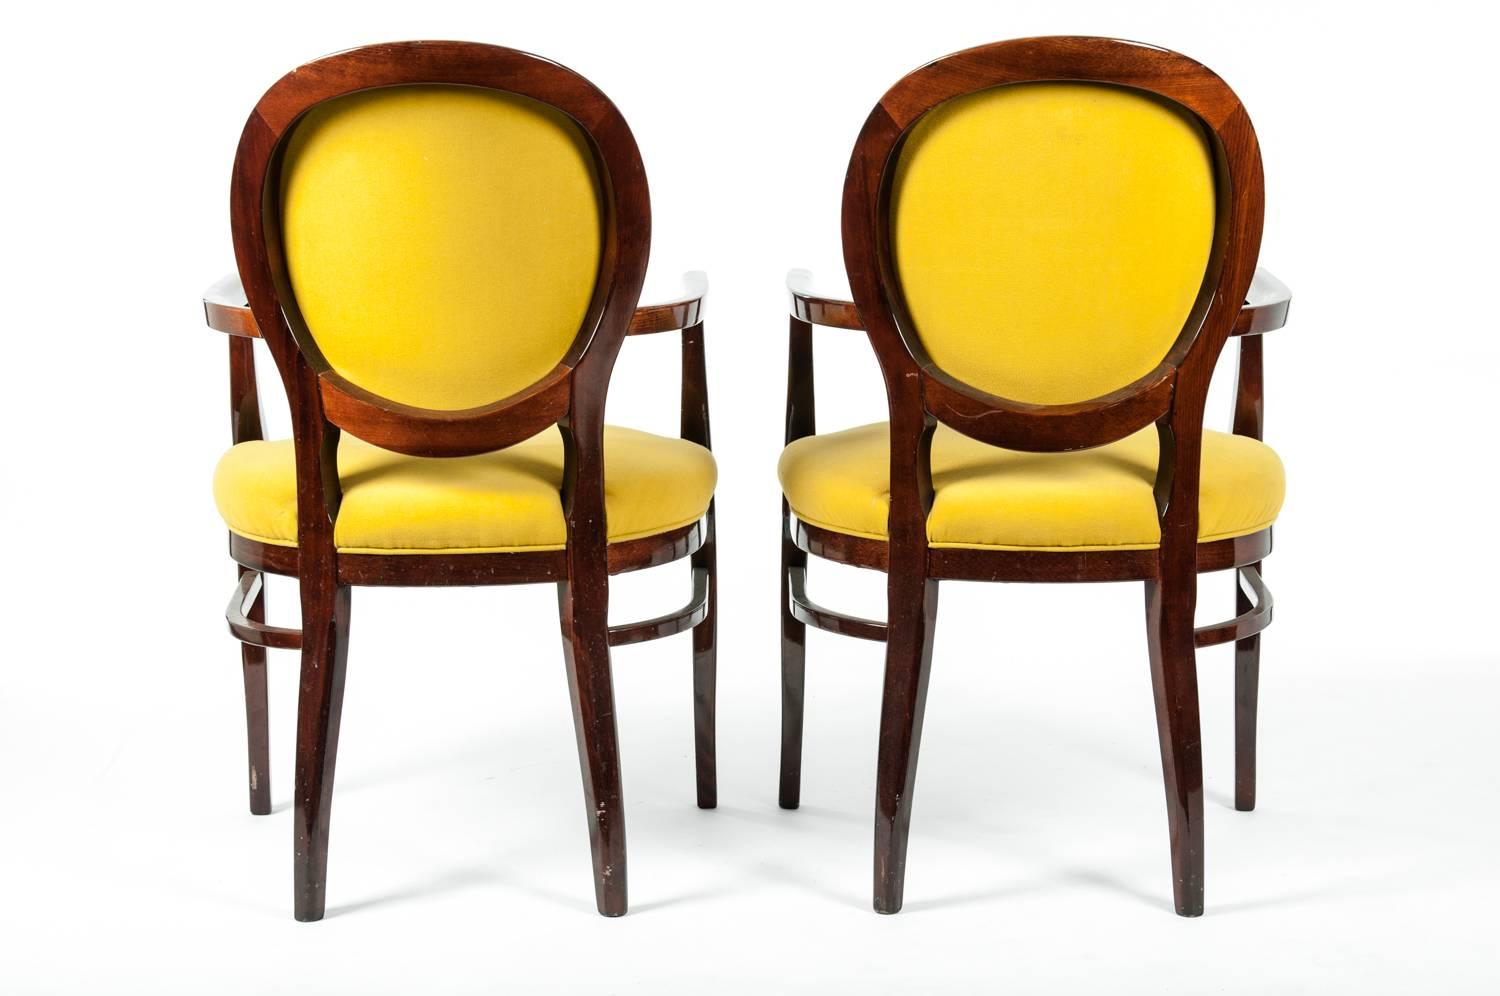 Lacquer Mid-Century Modern Art Deco, Pair of Chairs